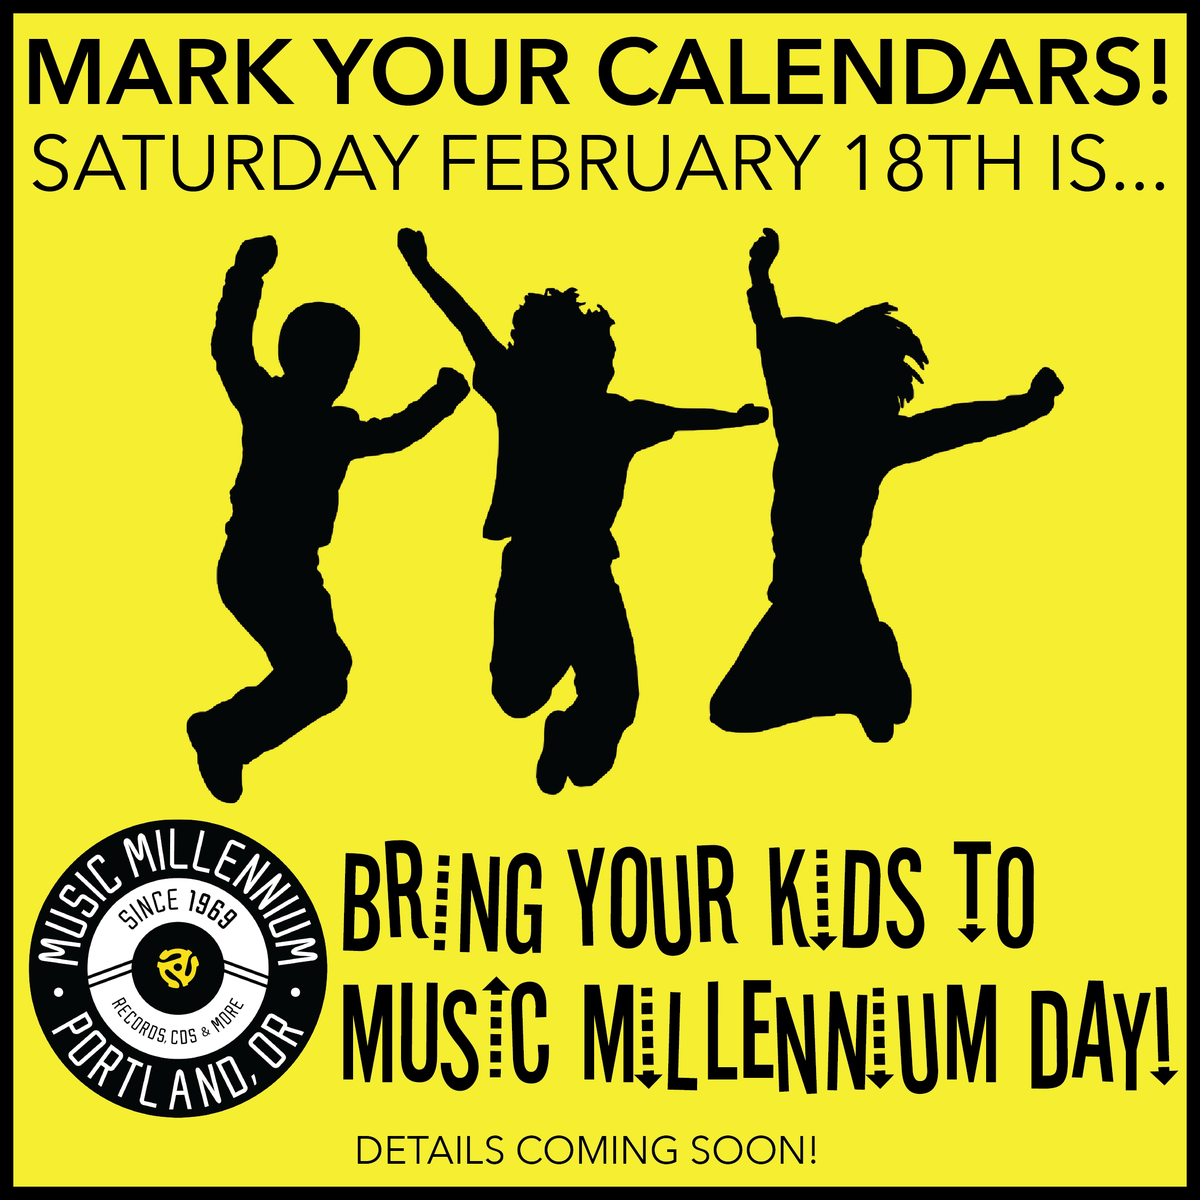 Let's co-create the next generation of lifelong music lovers, musicians and artists! February 18th is 'Bring Your Kids To Music Millennium' Day from 10am to 6pm! Free gift bags to the first 200 kids 18 and under! Live performances!